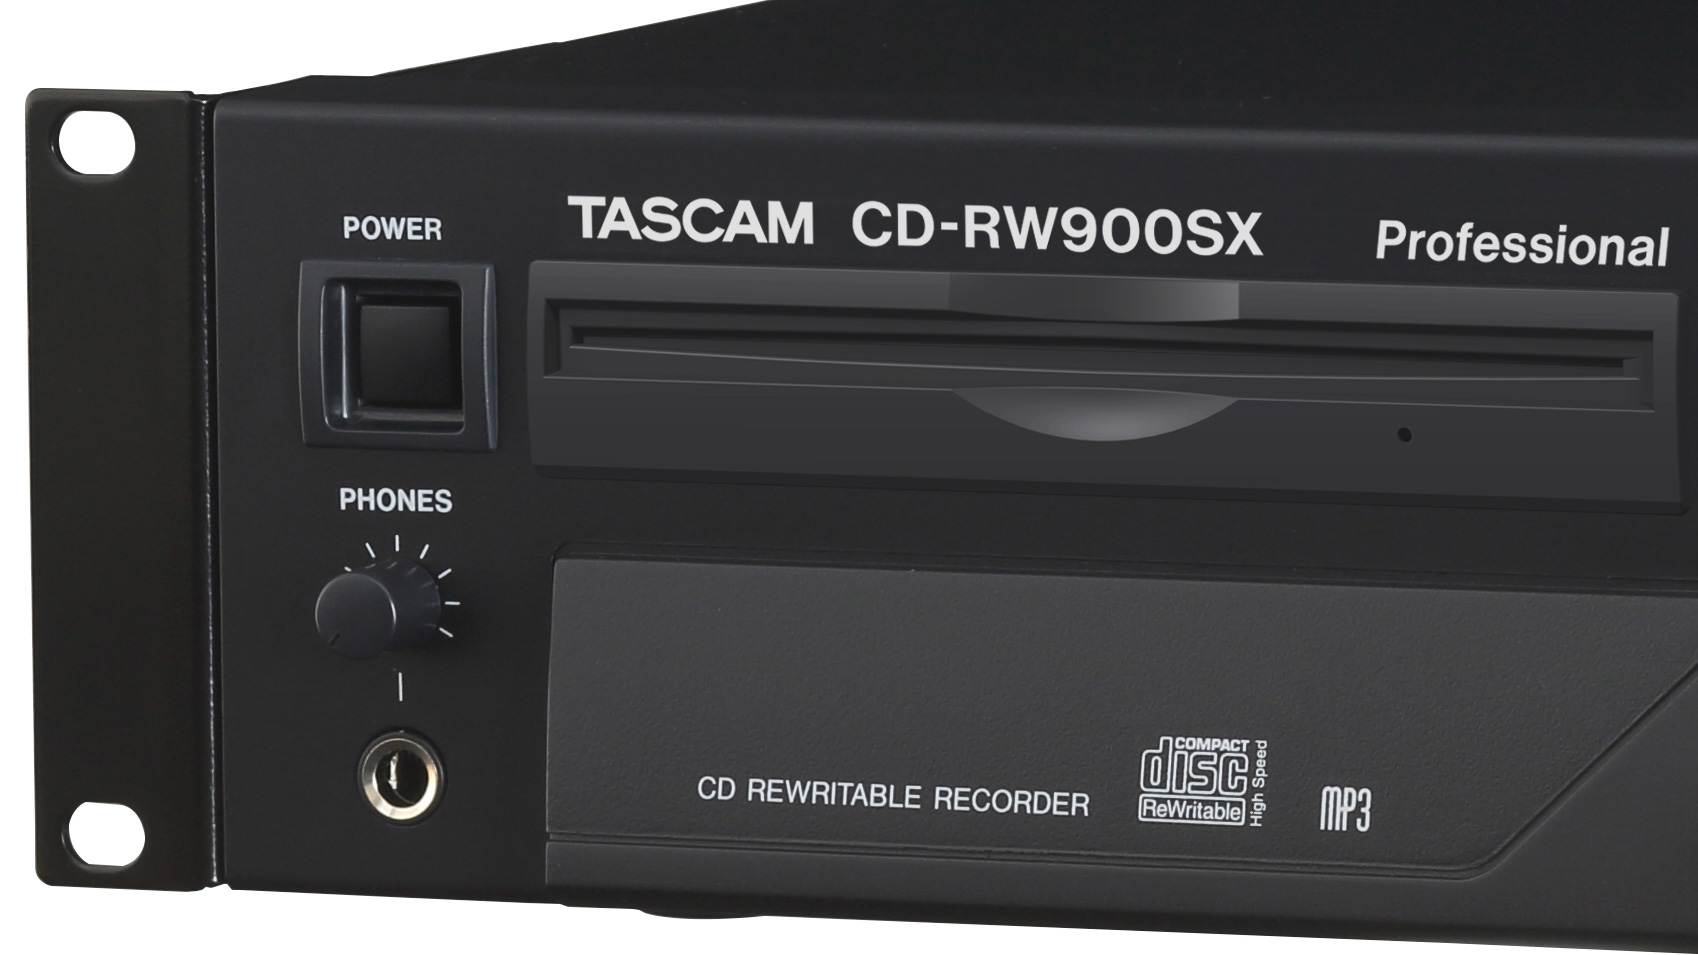 CD-RW900SX | FEATURES | TASCAM - United States